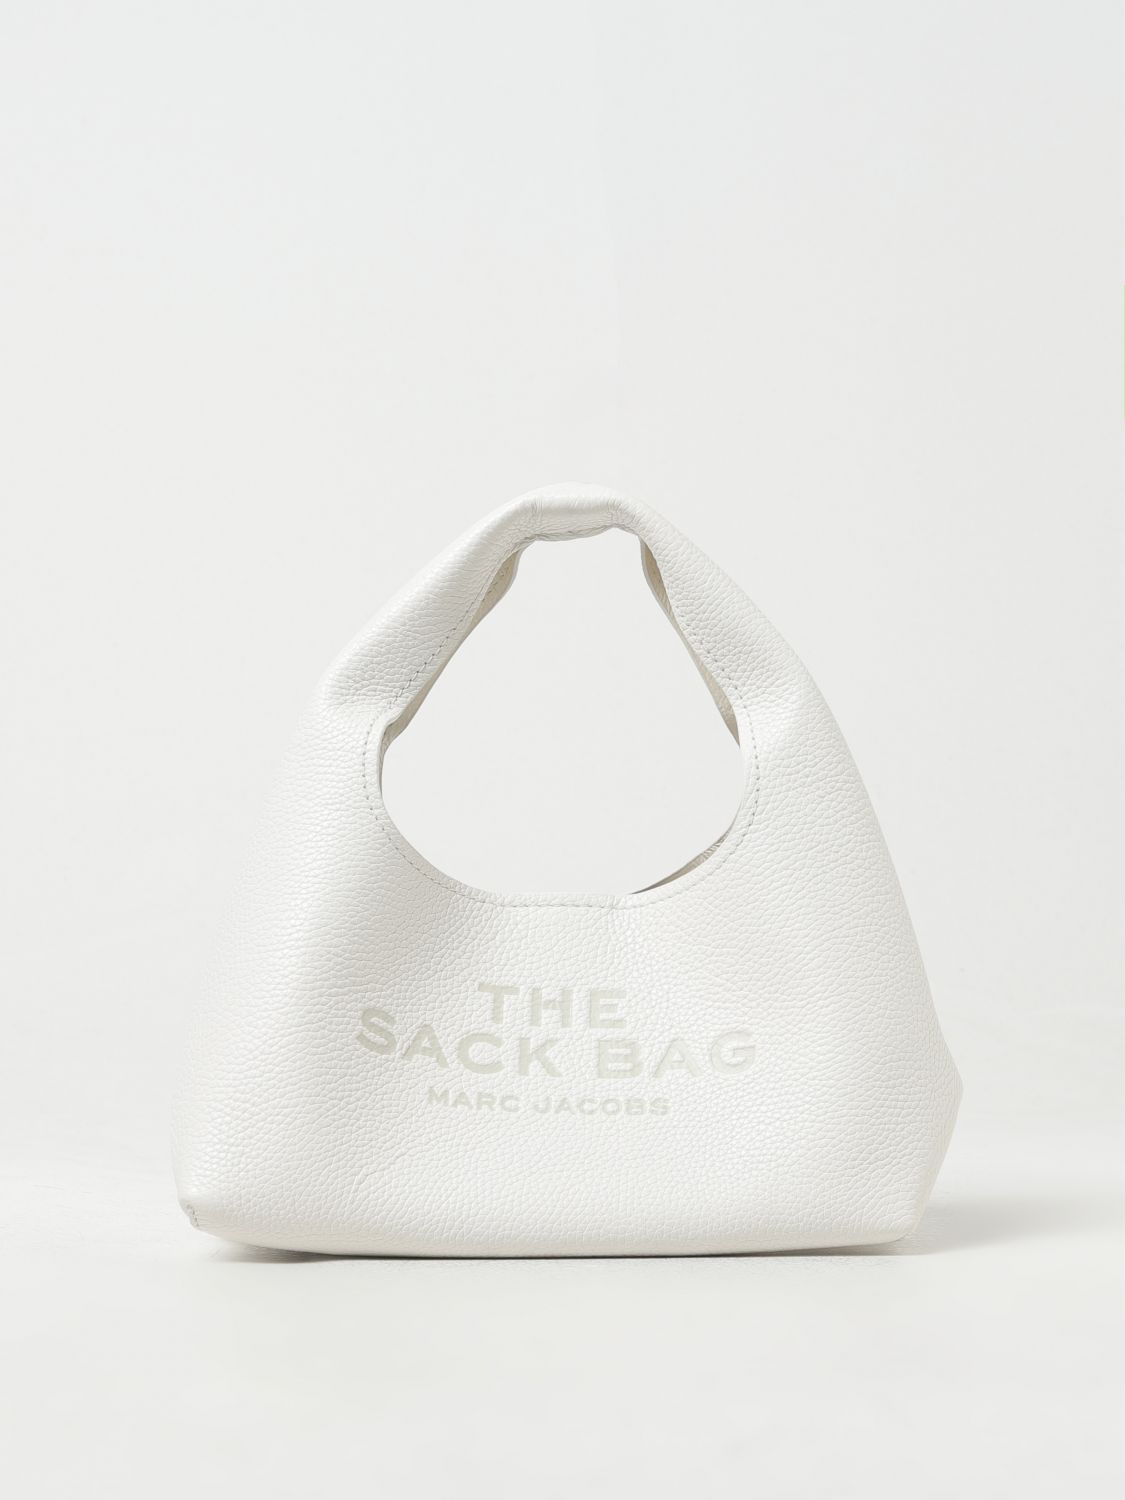 Marc Jacobs The Sack Bag In Grained Leather In White